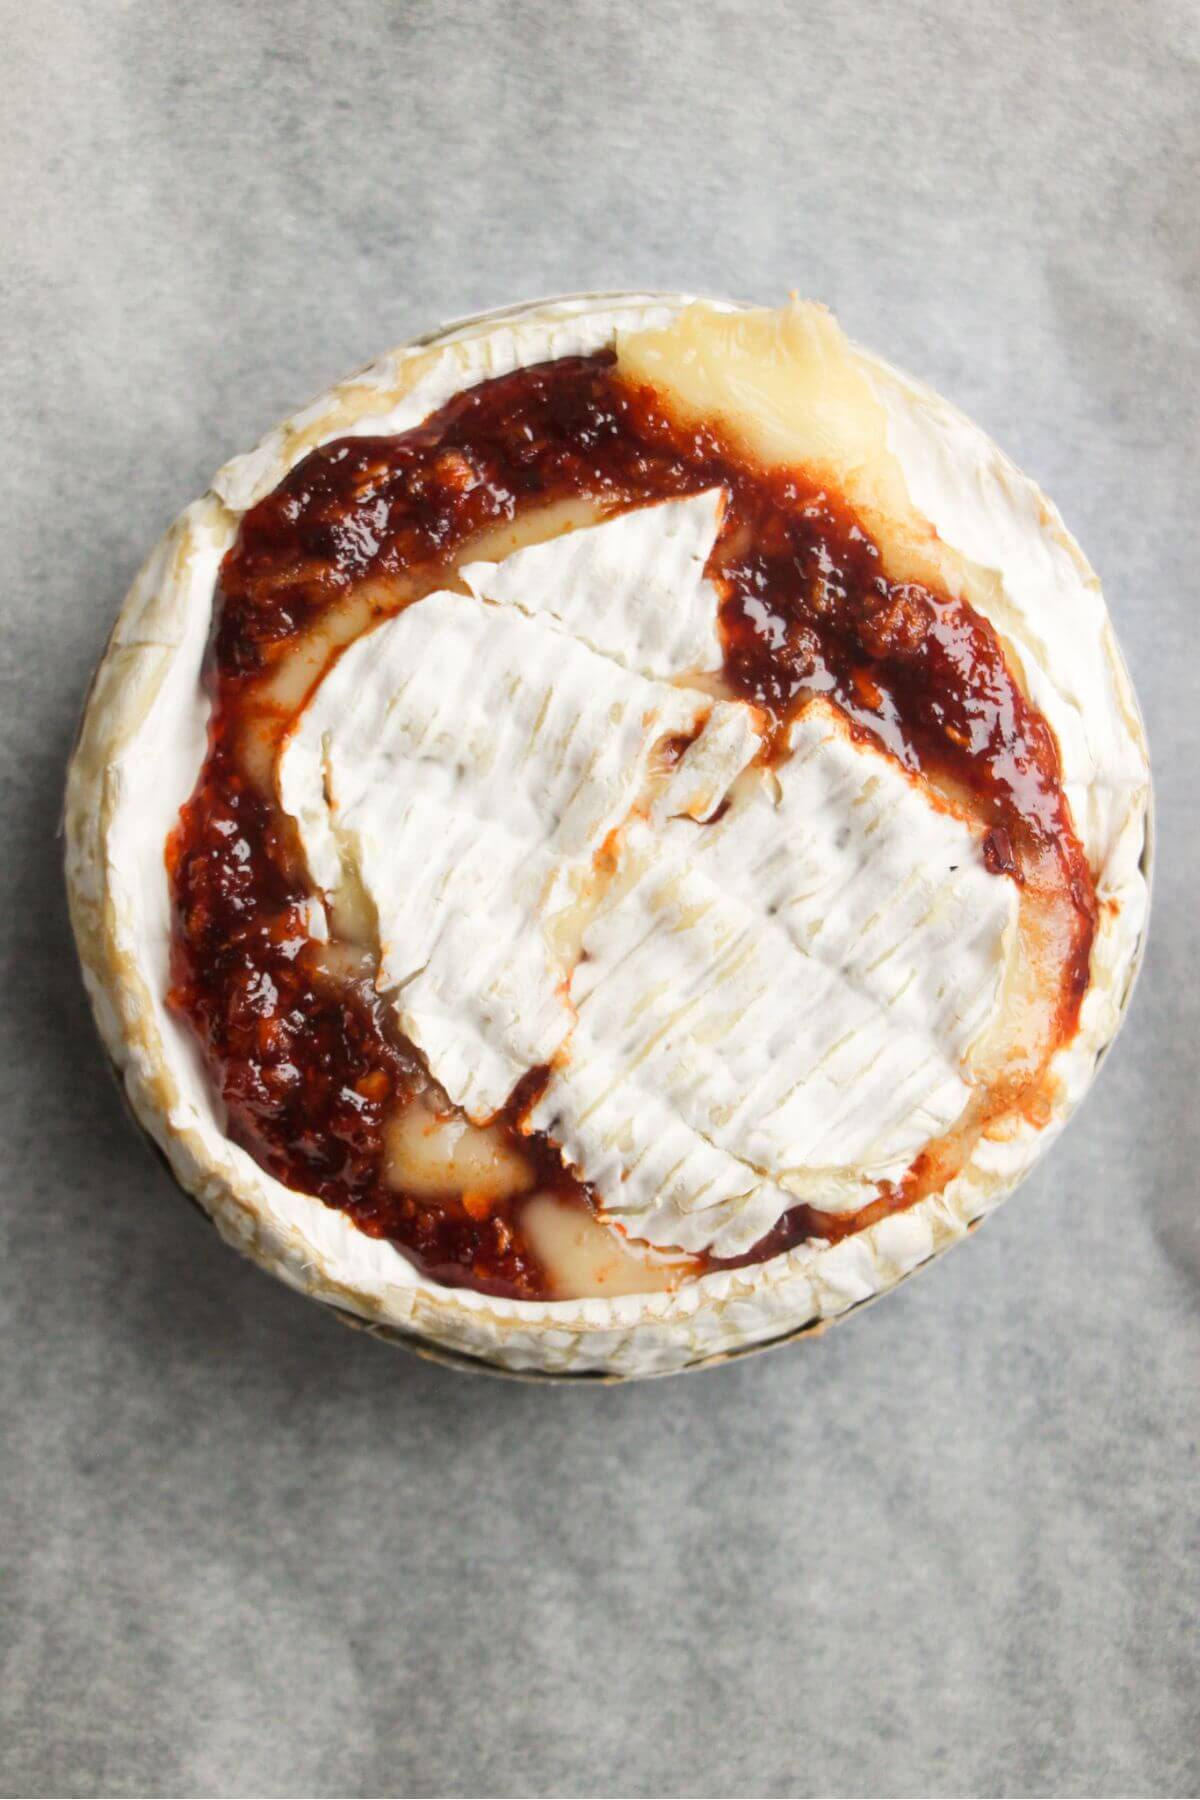 Camembert top placed over honey harissa sauce on a small wheel of camembert.